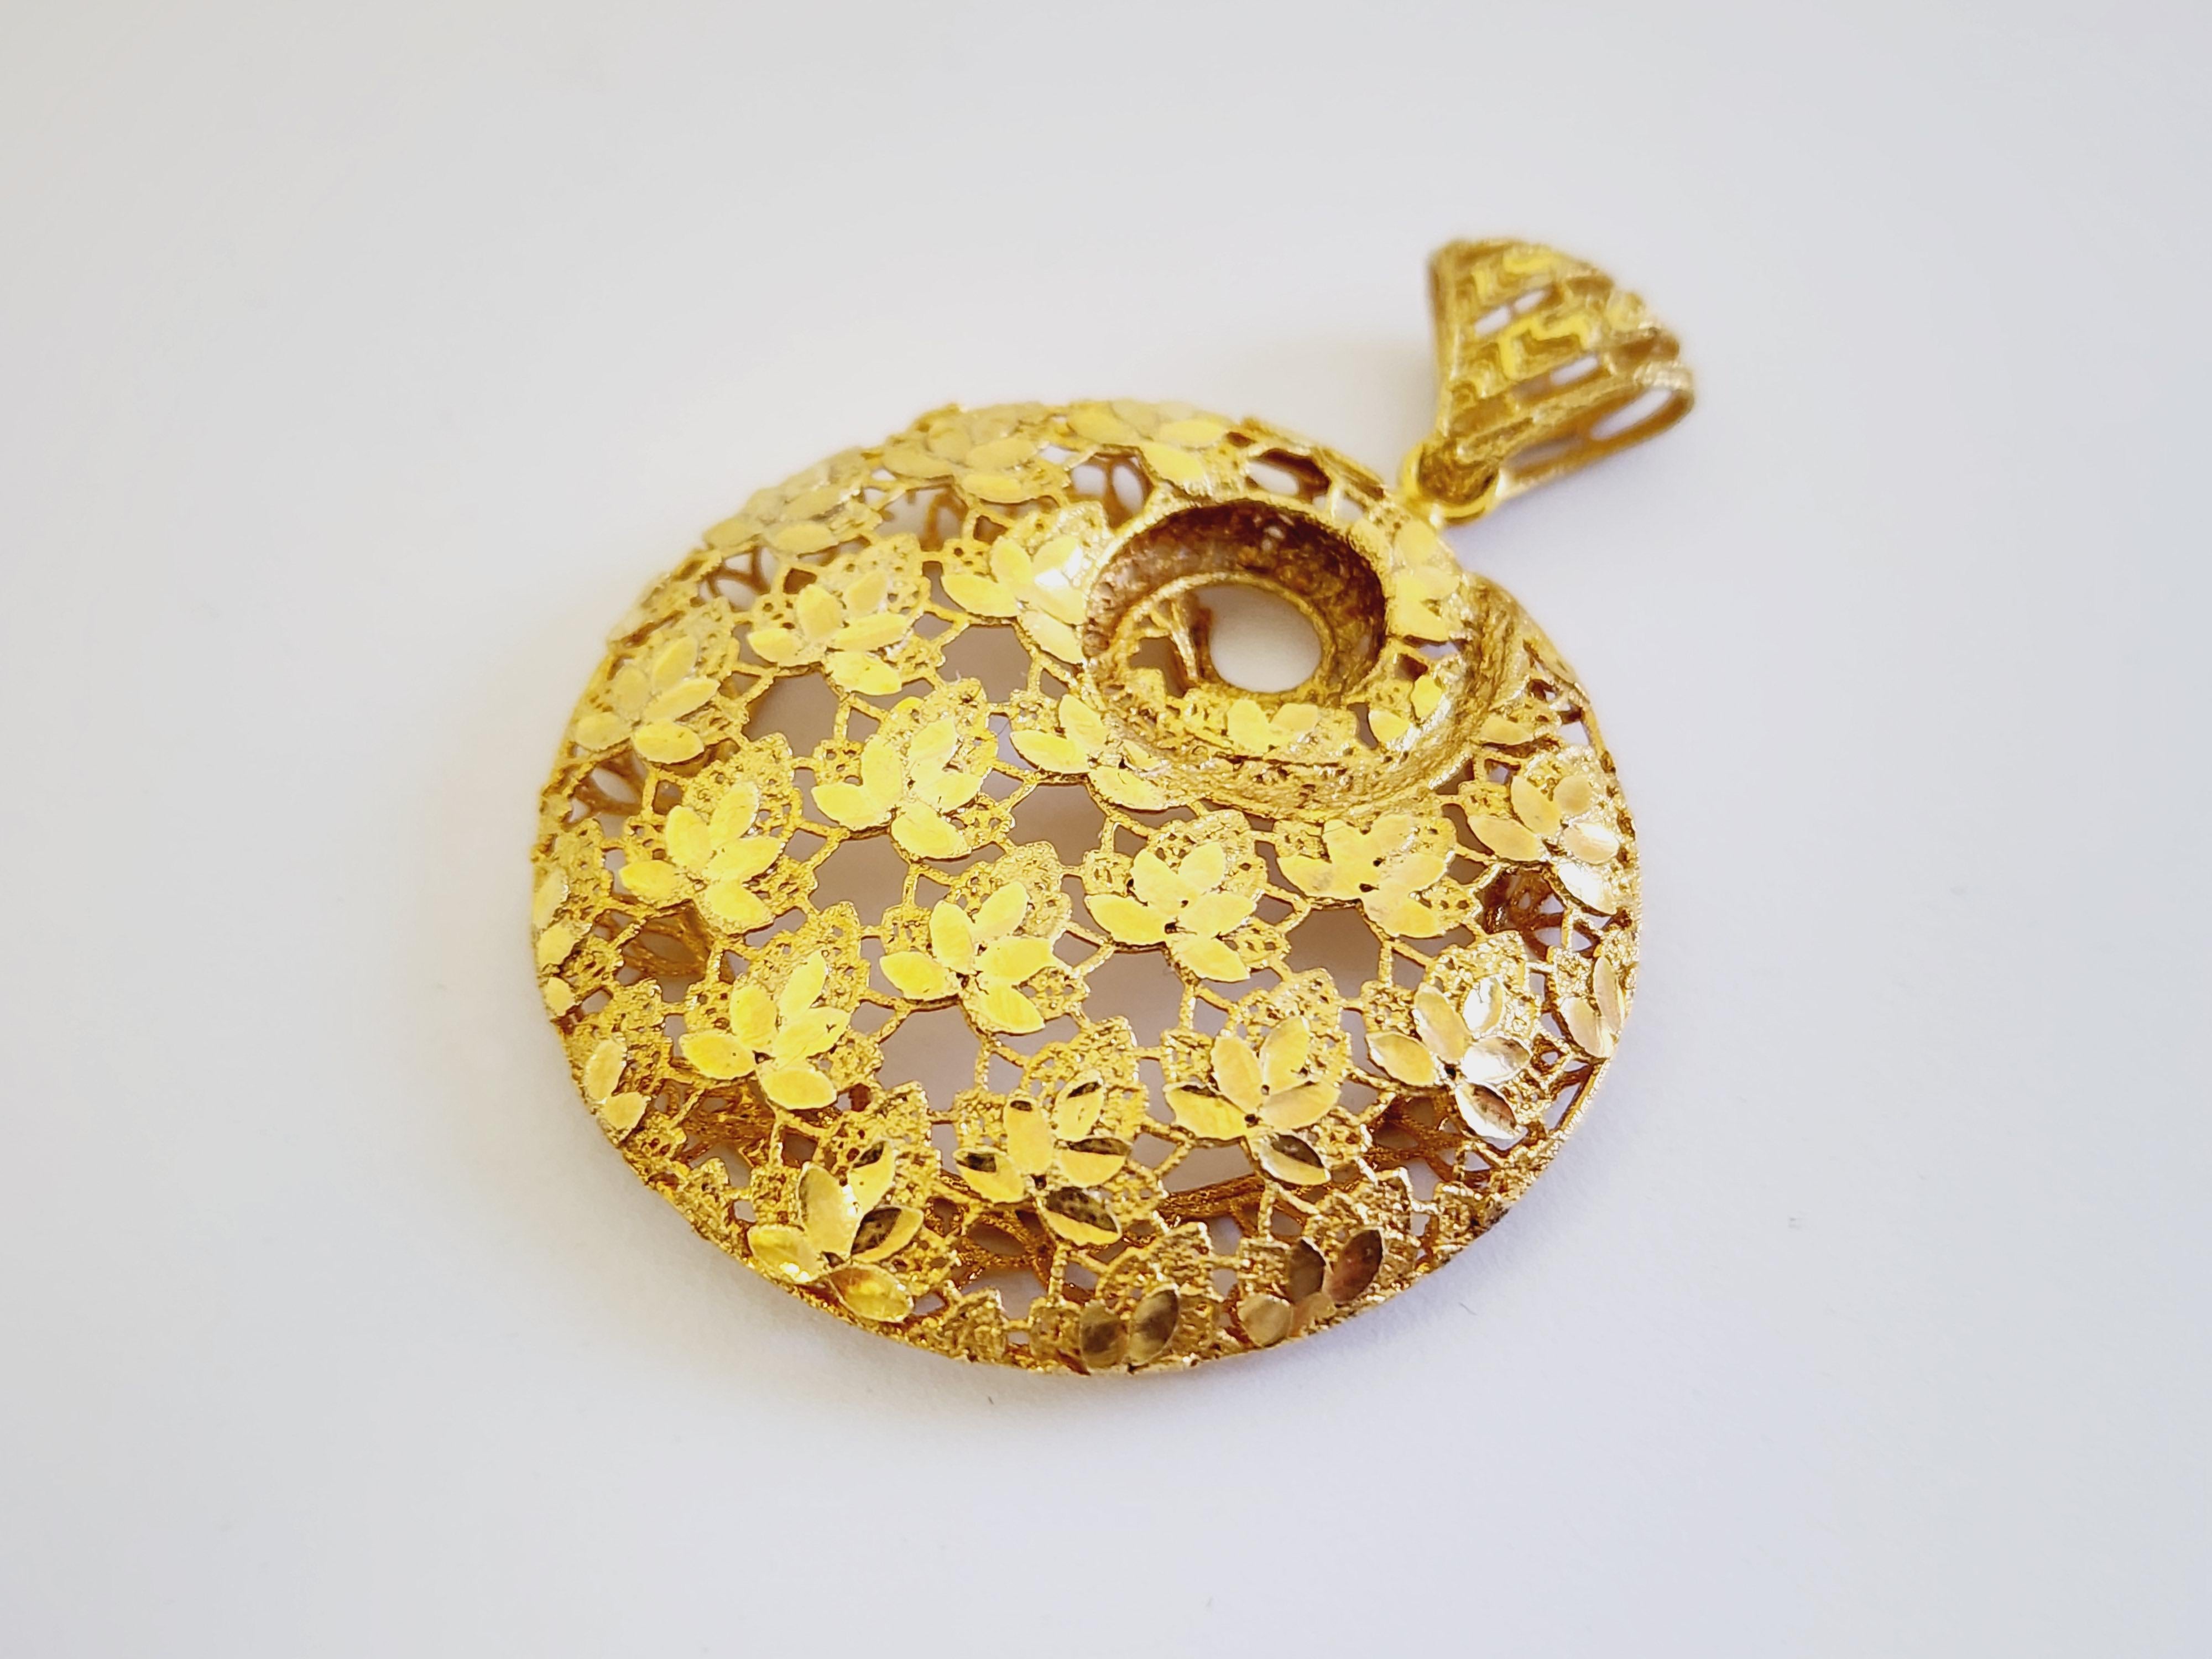 Round shape pendant 14k yellow gold. 
Pendant measures approximately 1.85 inch length and 1.40 inch wide.

(Pendant Only - Chain sold separately)